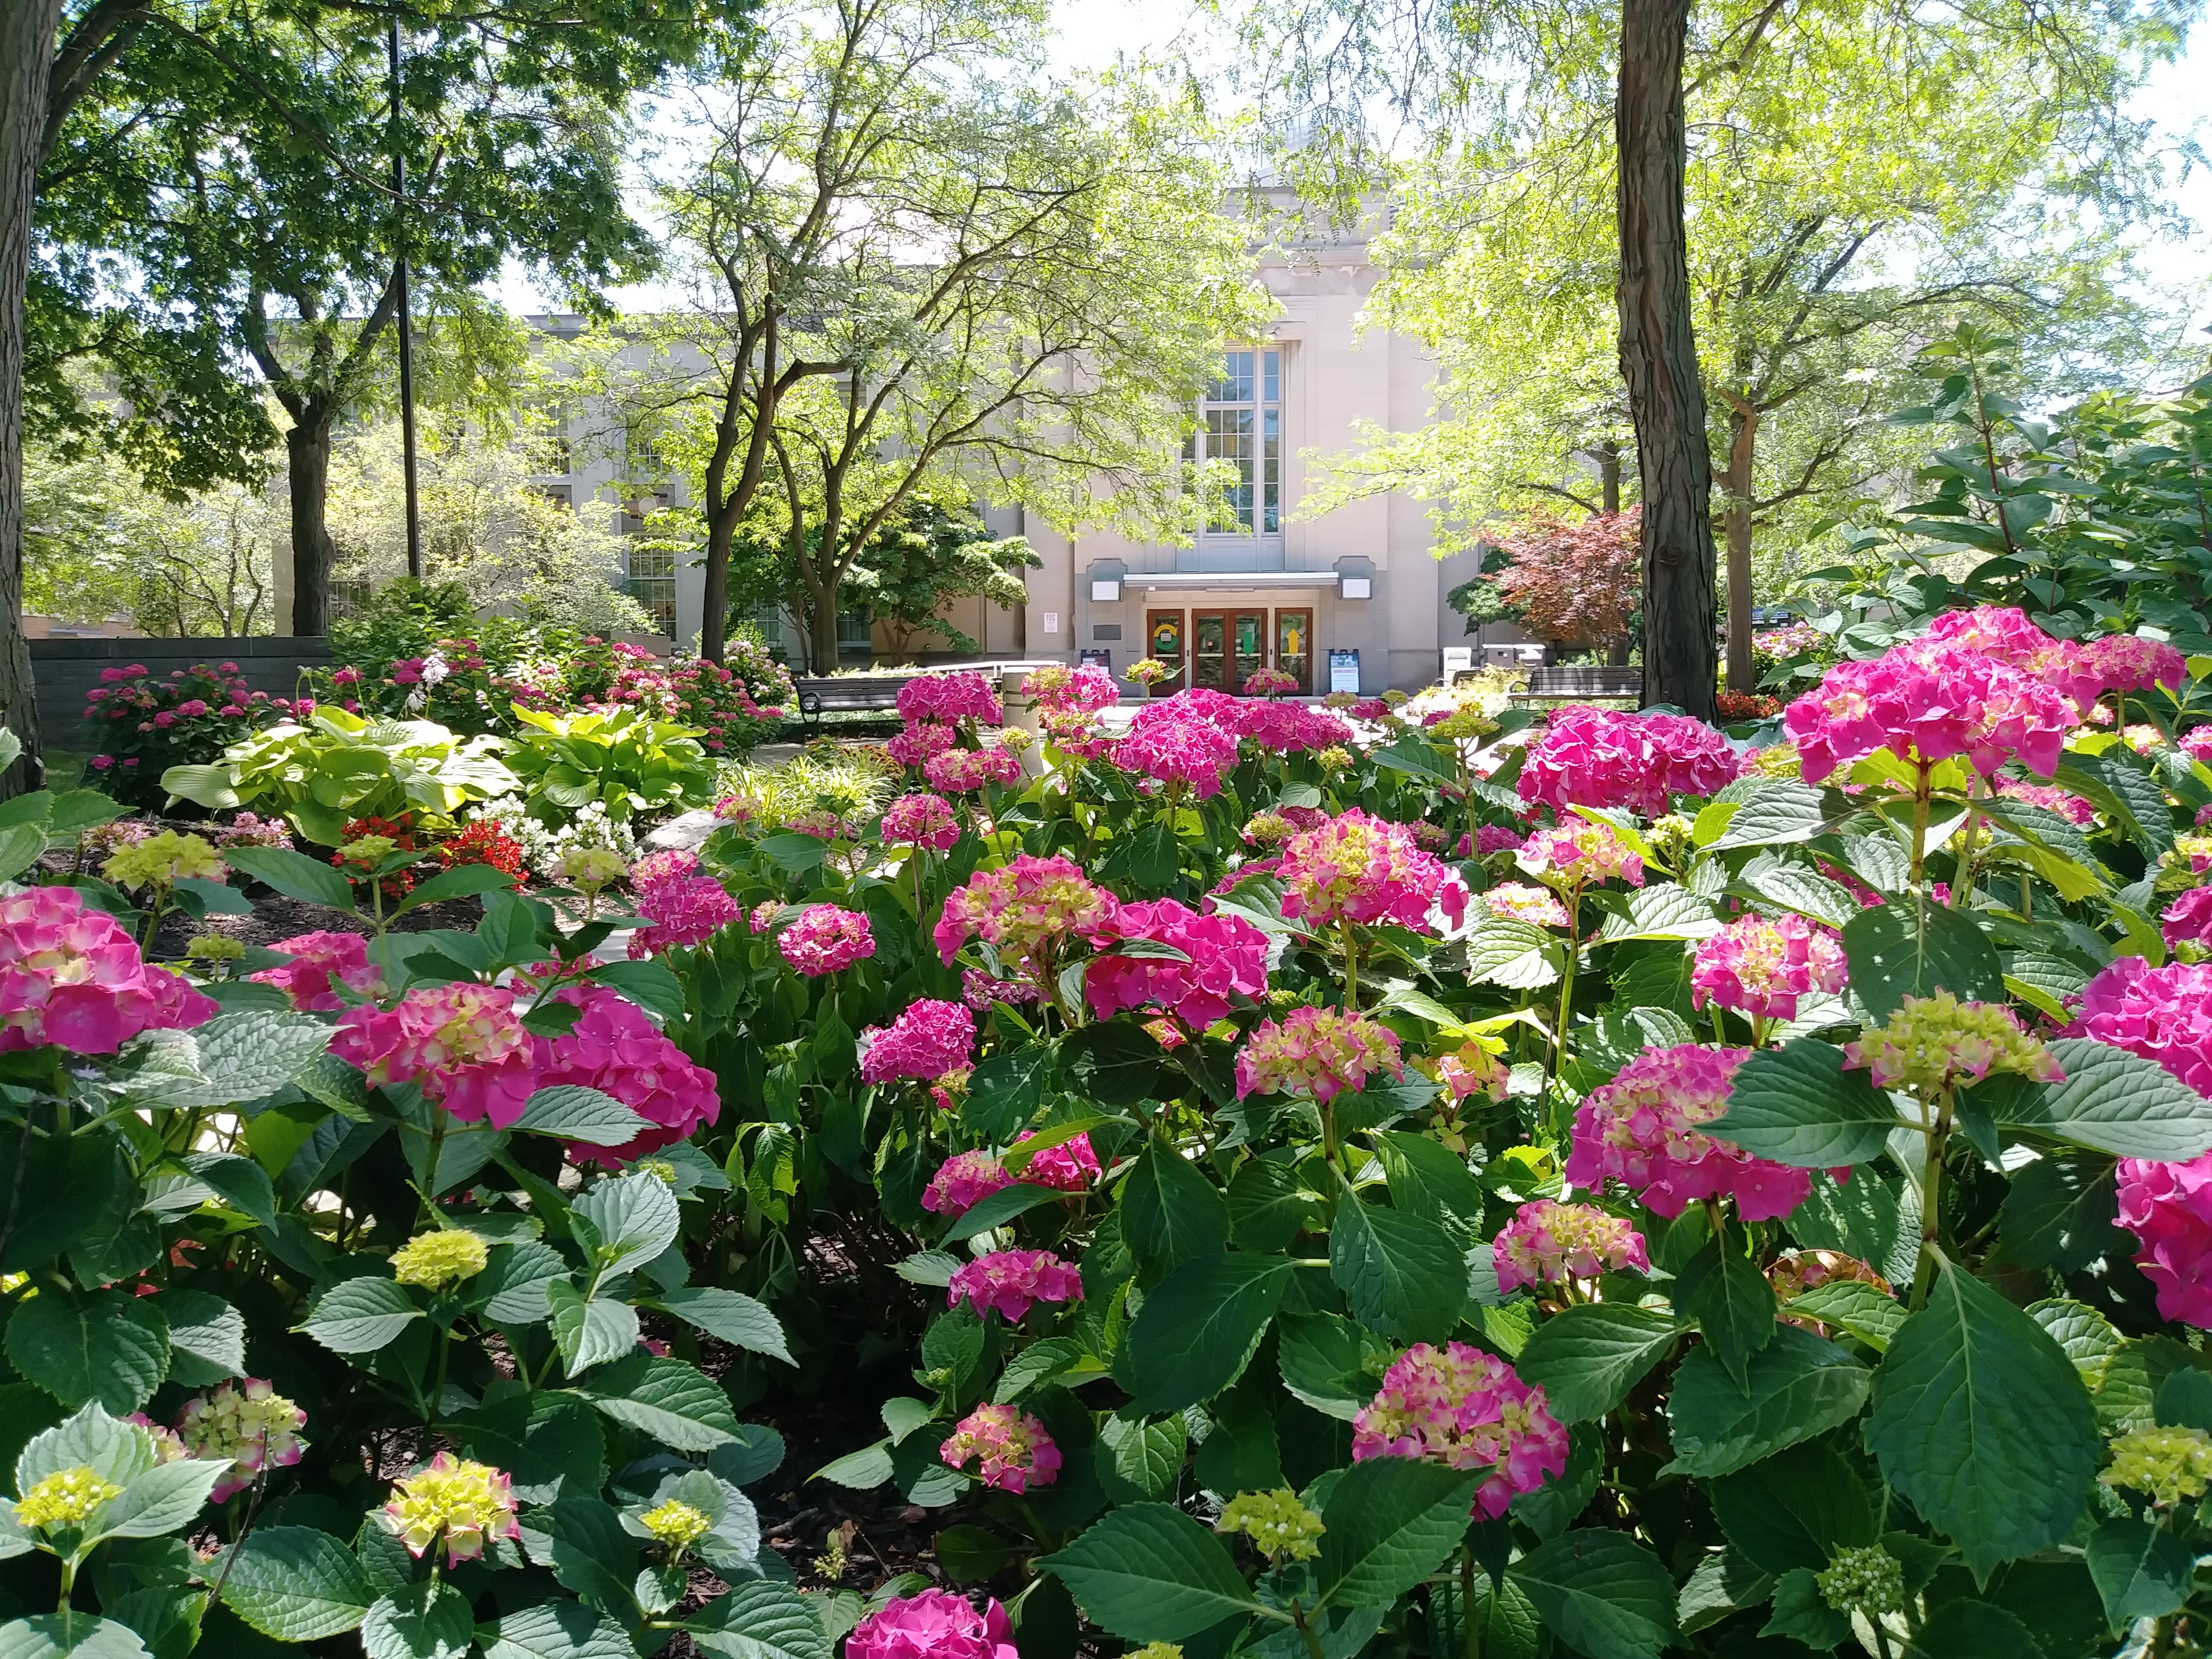 Flowers in front of Tomlinson Hall, Summer 2022